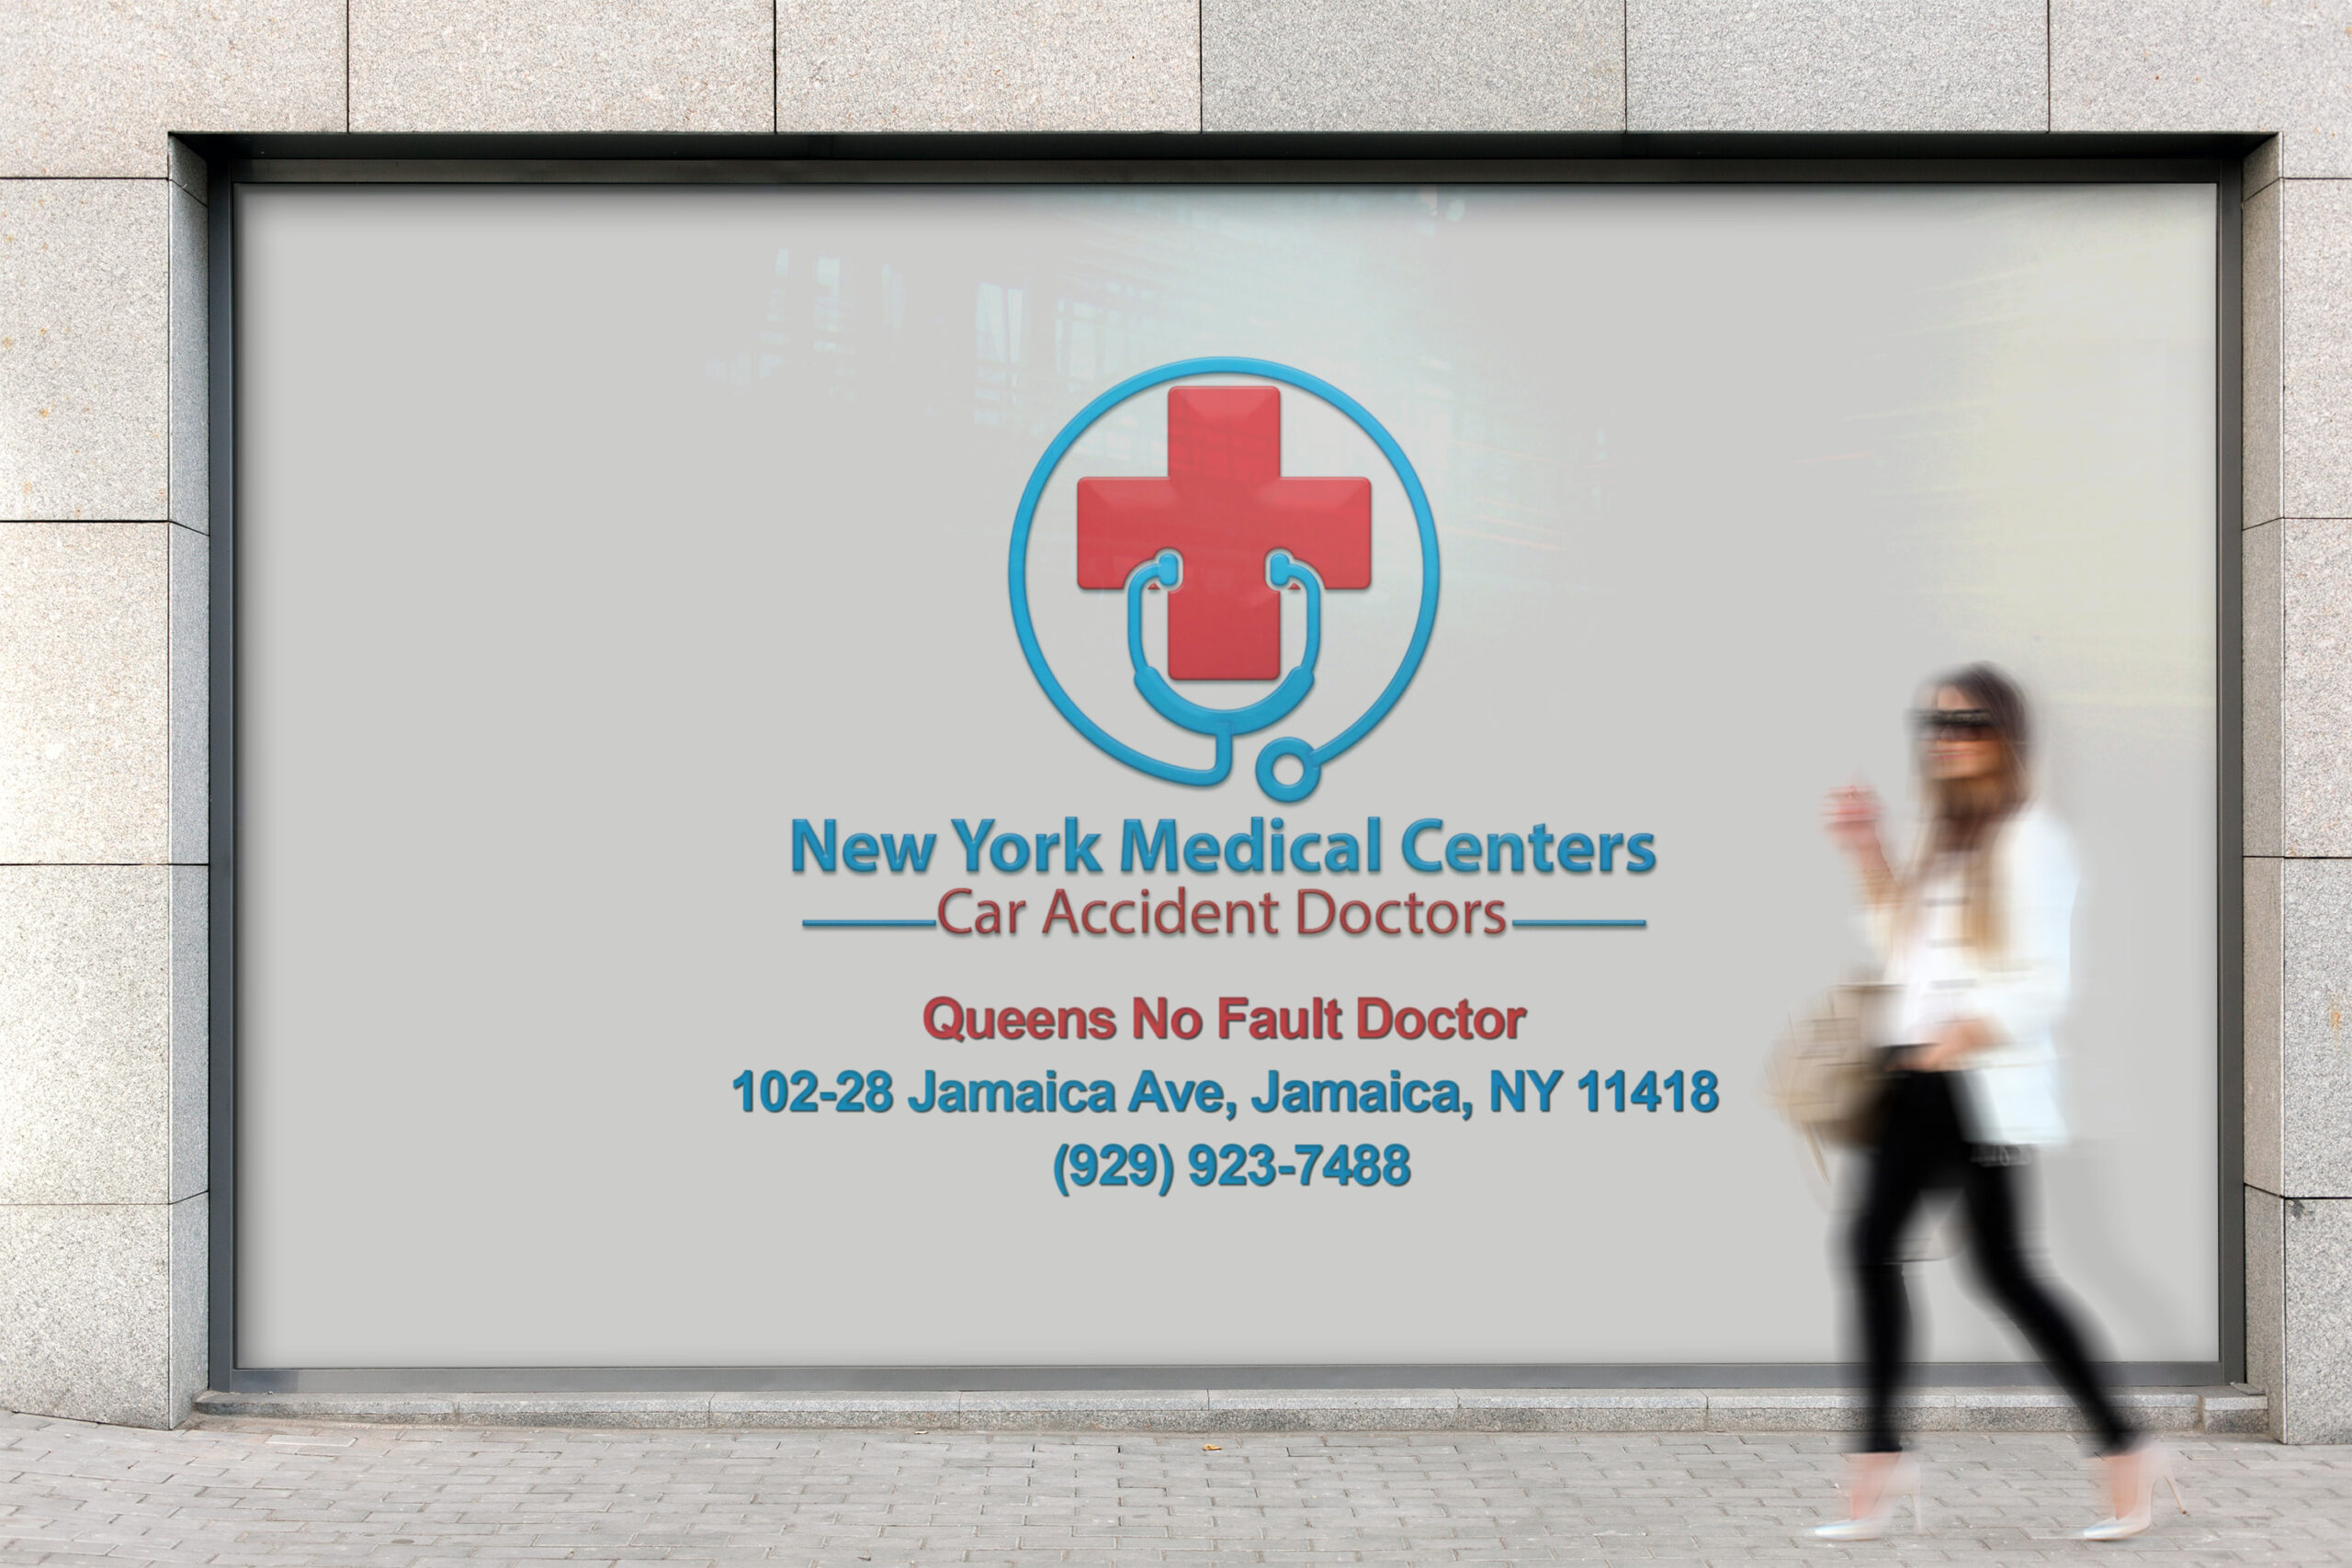 New York Medical Center – Queens No Fault Doctor – Workers Compensation Doctor<br />
102-28 Jamaica Ave, Queens, NY 11418<br />
929-923-7488